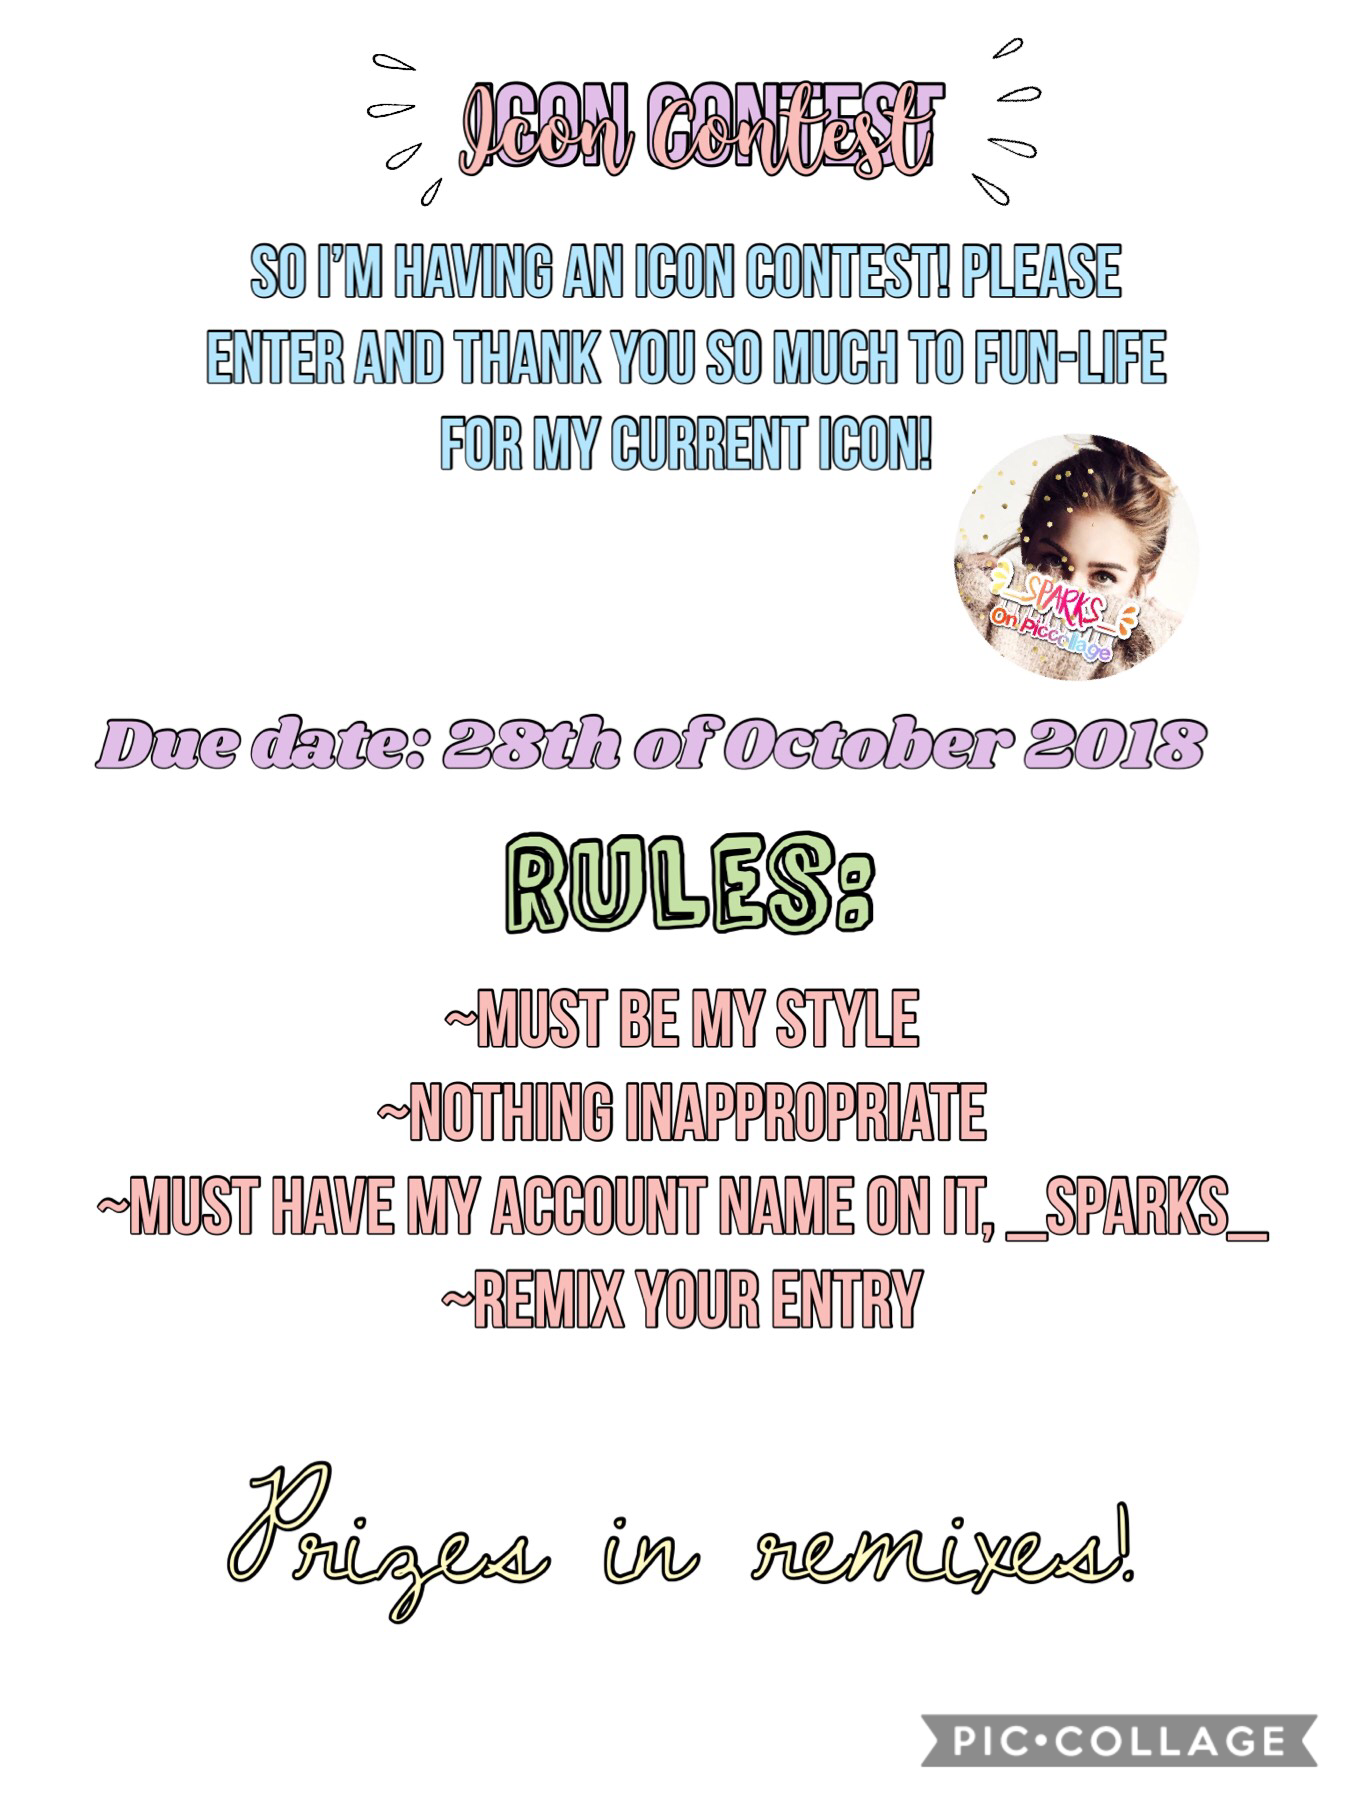 Icon contest! Please enter, it would mean so mush to me😘😘